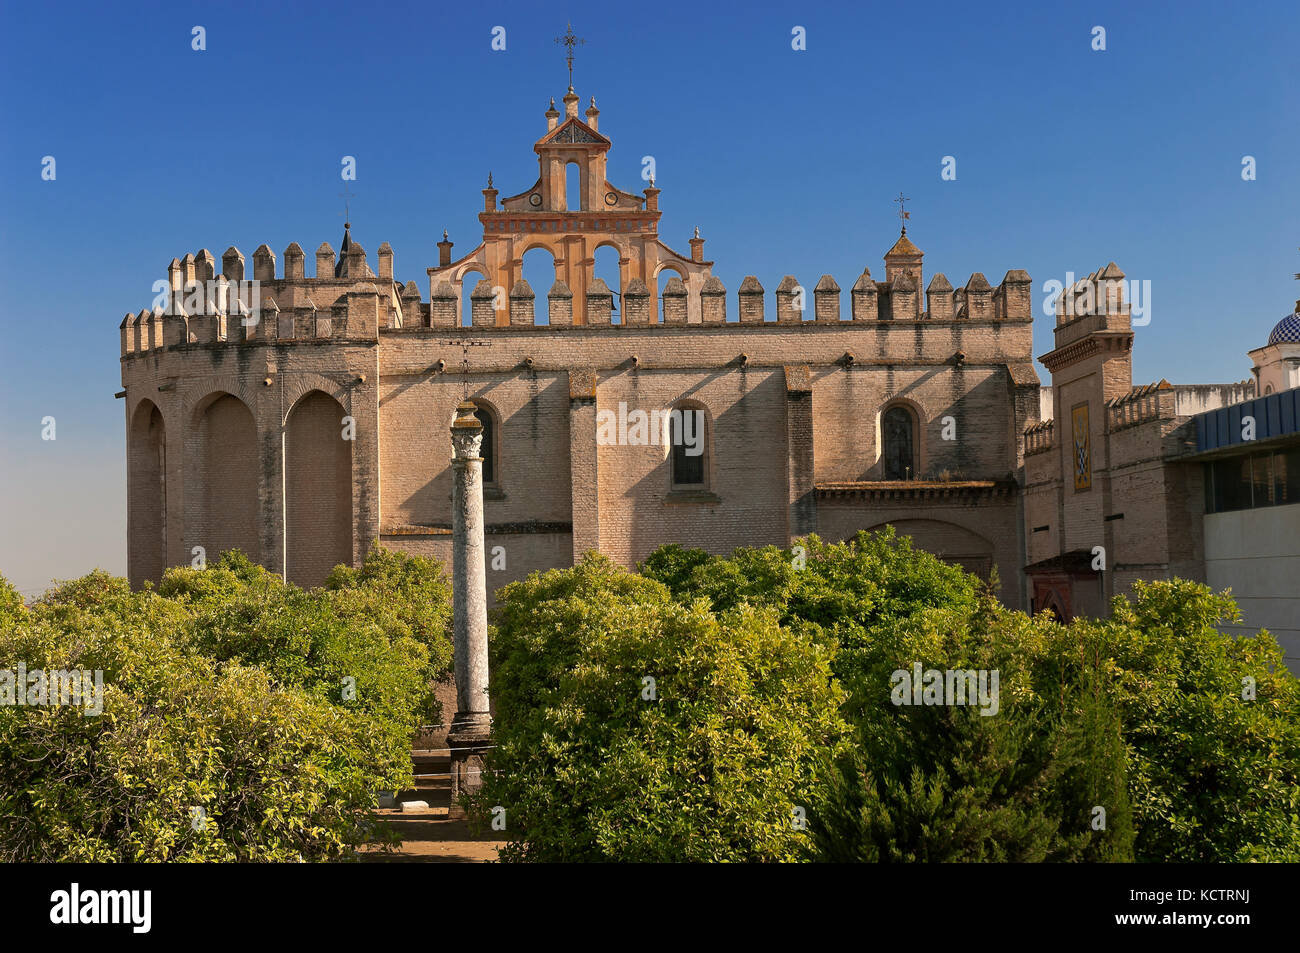 Monastery of San Isidoro del Campo - founded in 1301, Santiponce, Seville province, Region of Andalusia, Spain, Europe Stock Photo